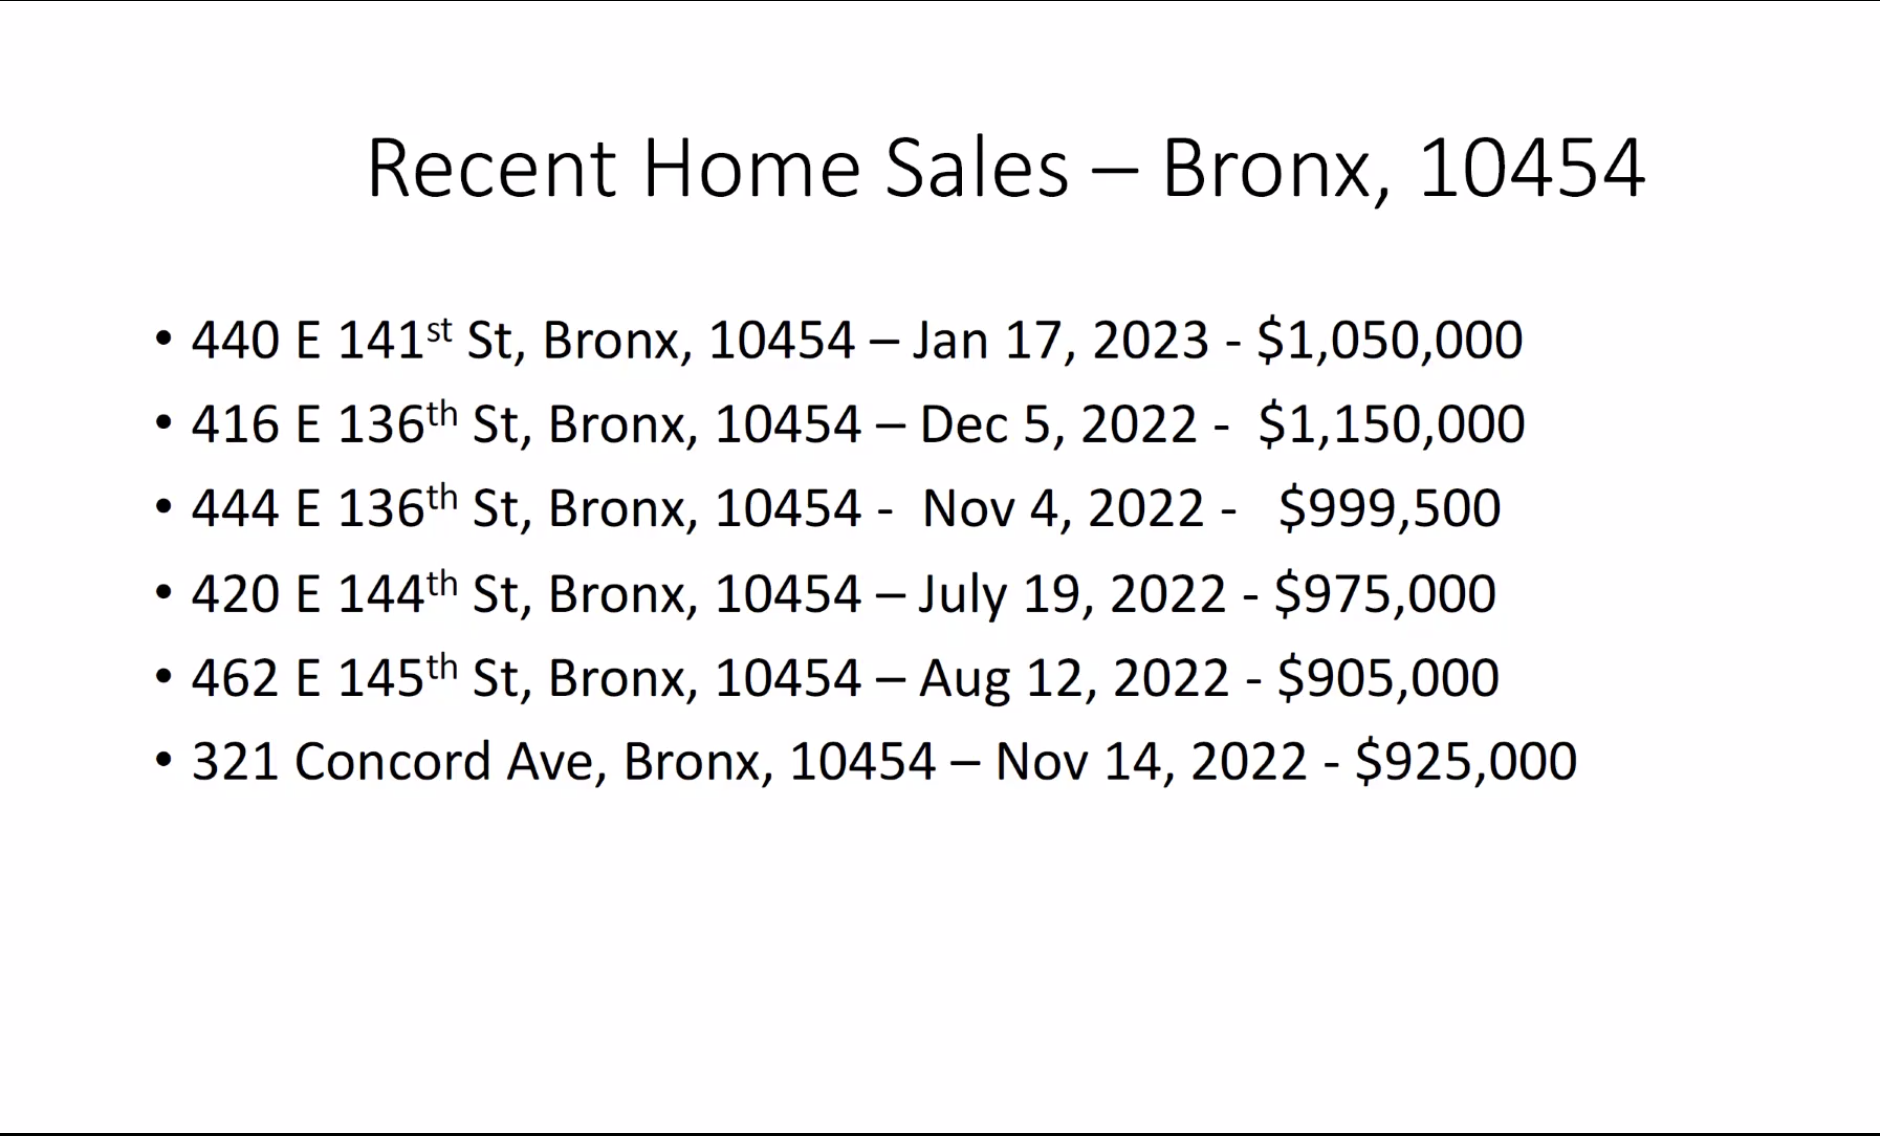 A presentation slide shows recent home sales in the neighborhood. 